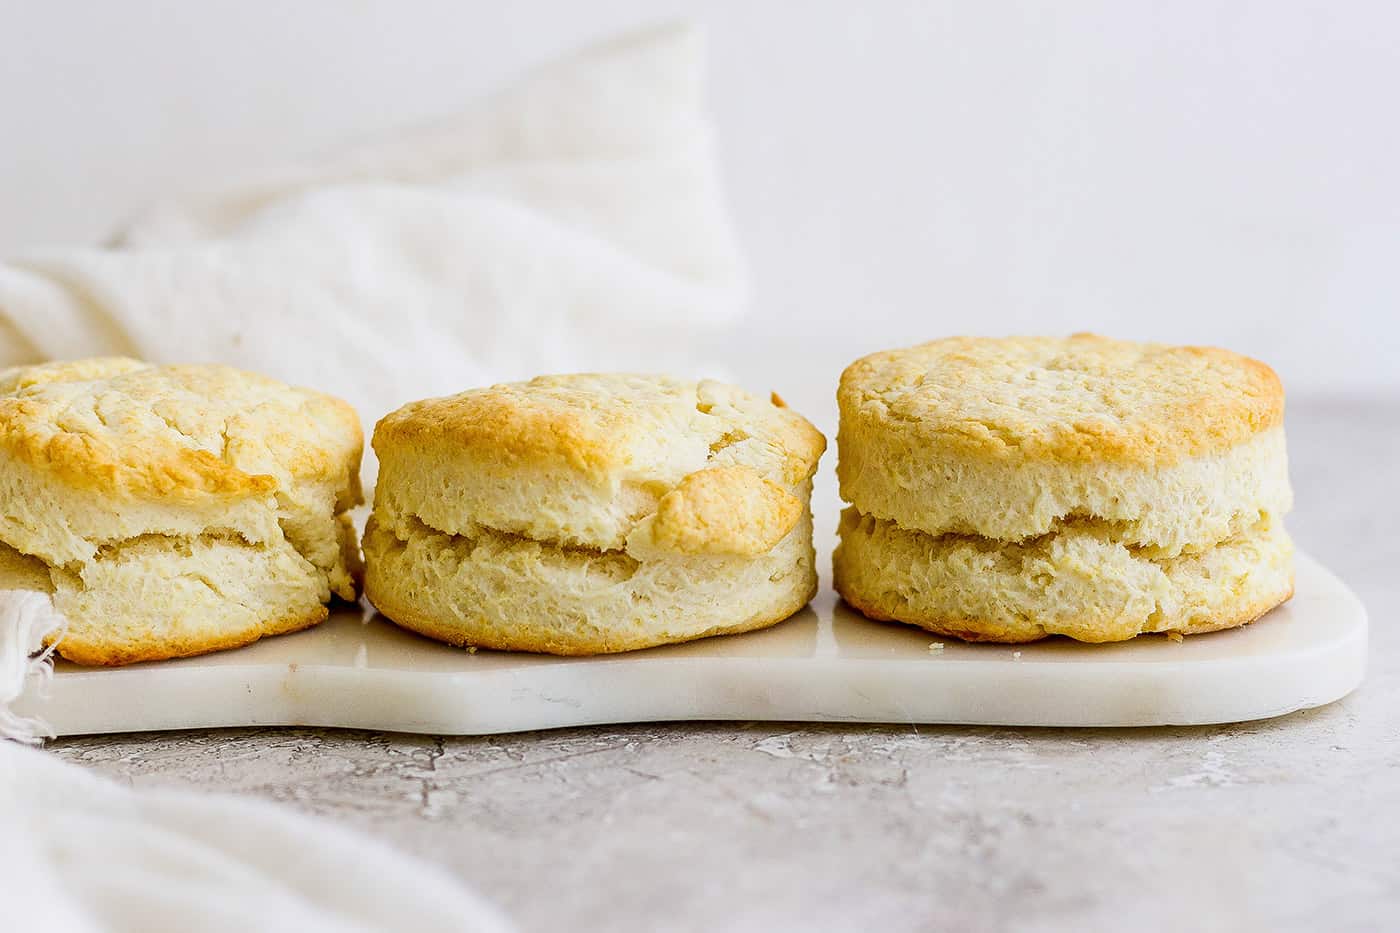 Three cream biscuits sit side by side on a white platter.